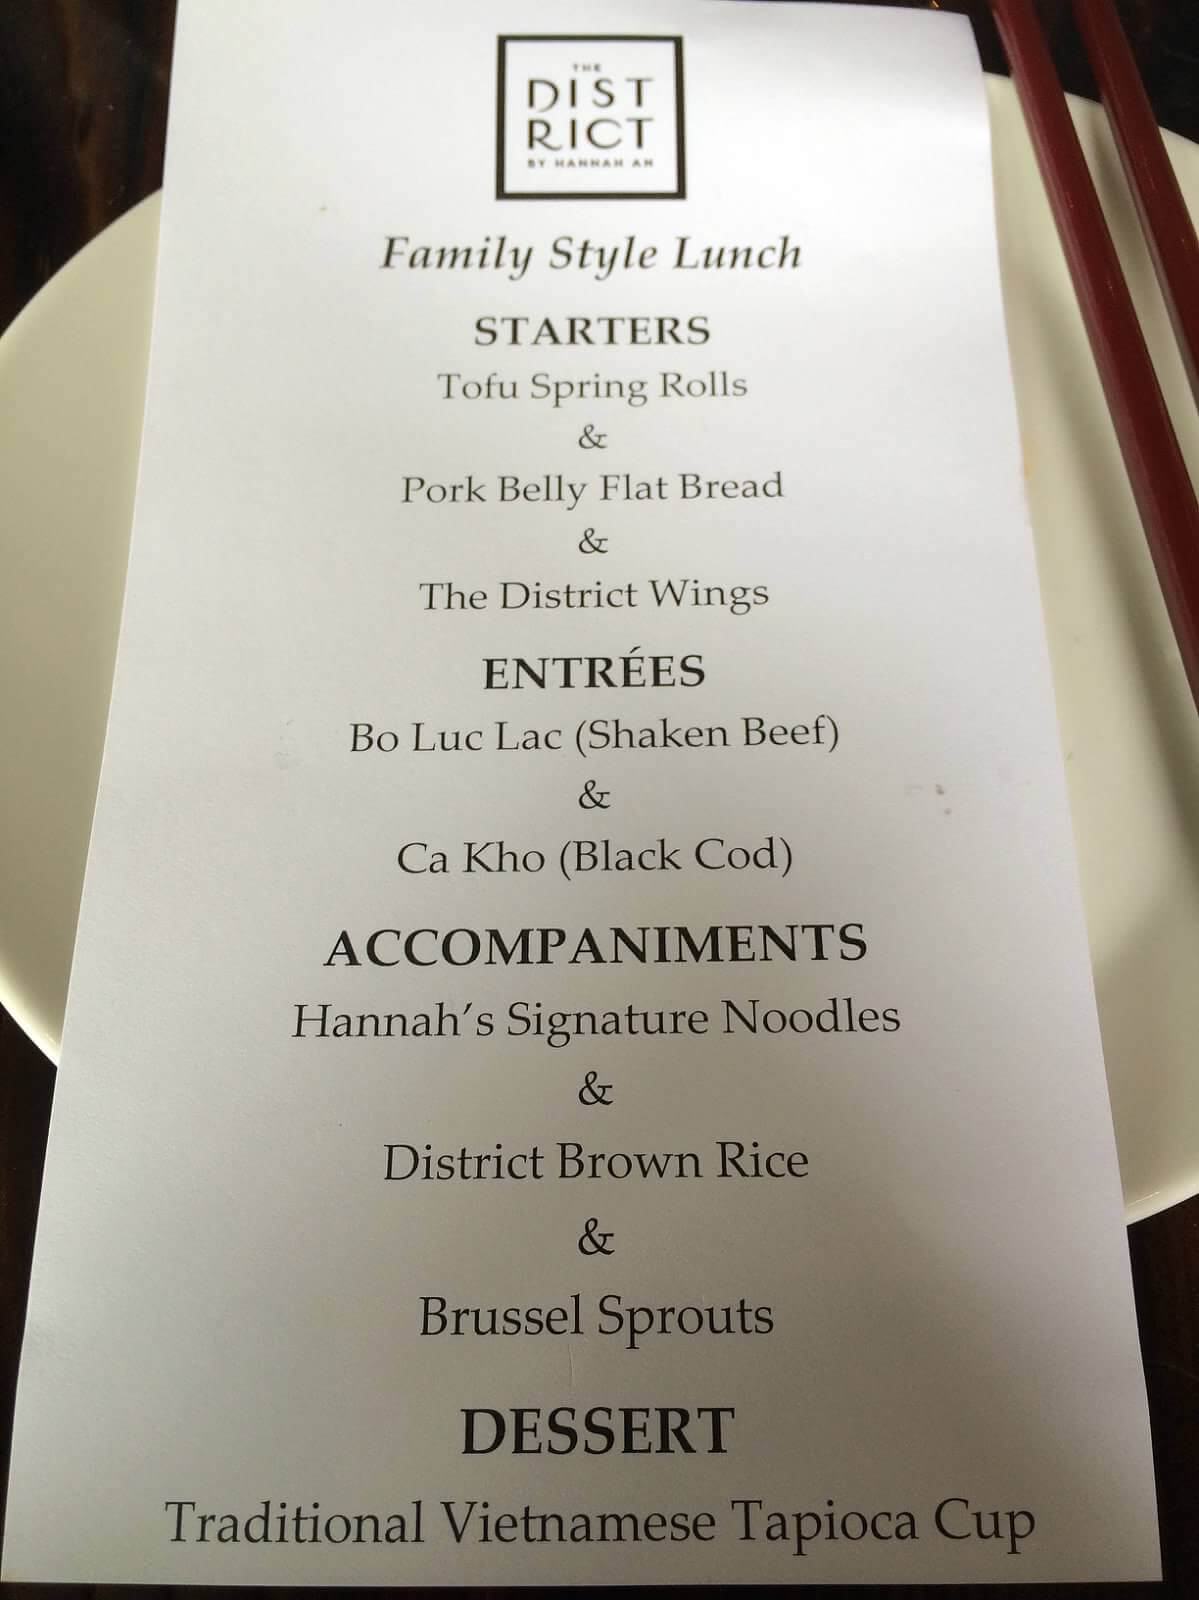 Our family-style menu. Every item was a winner!